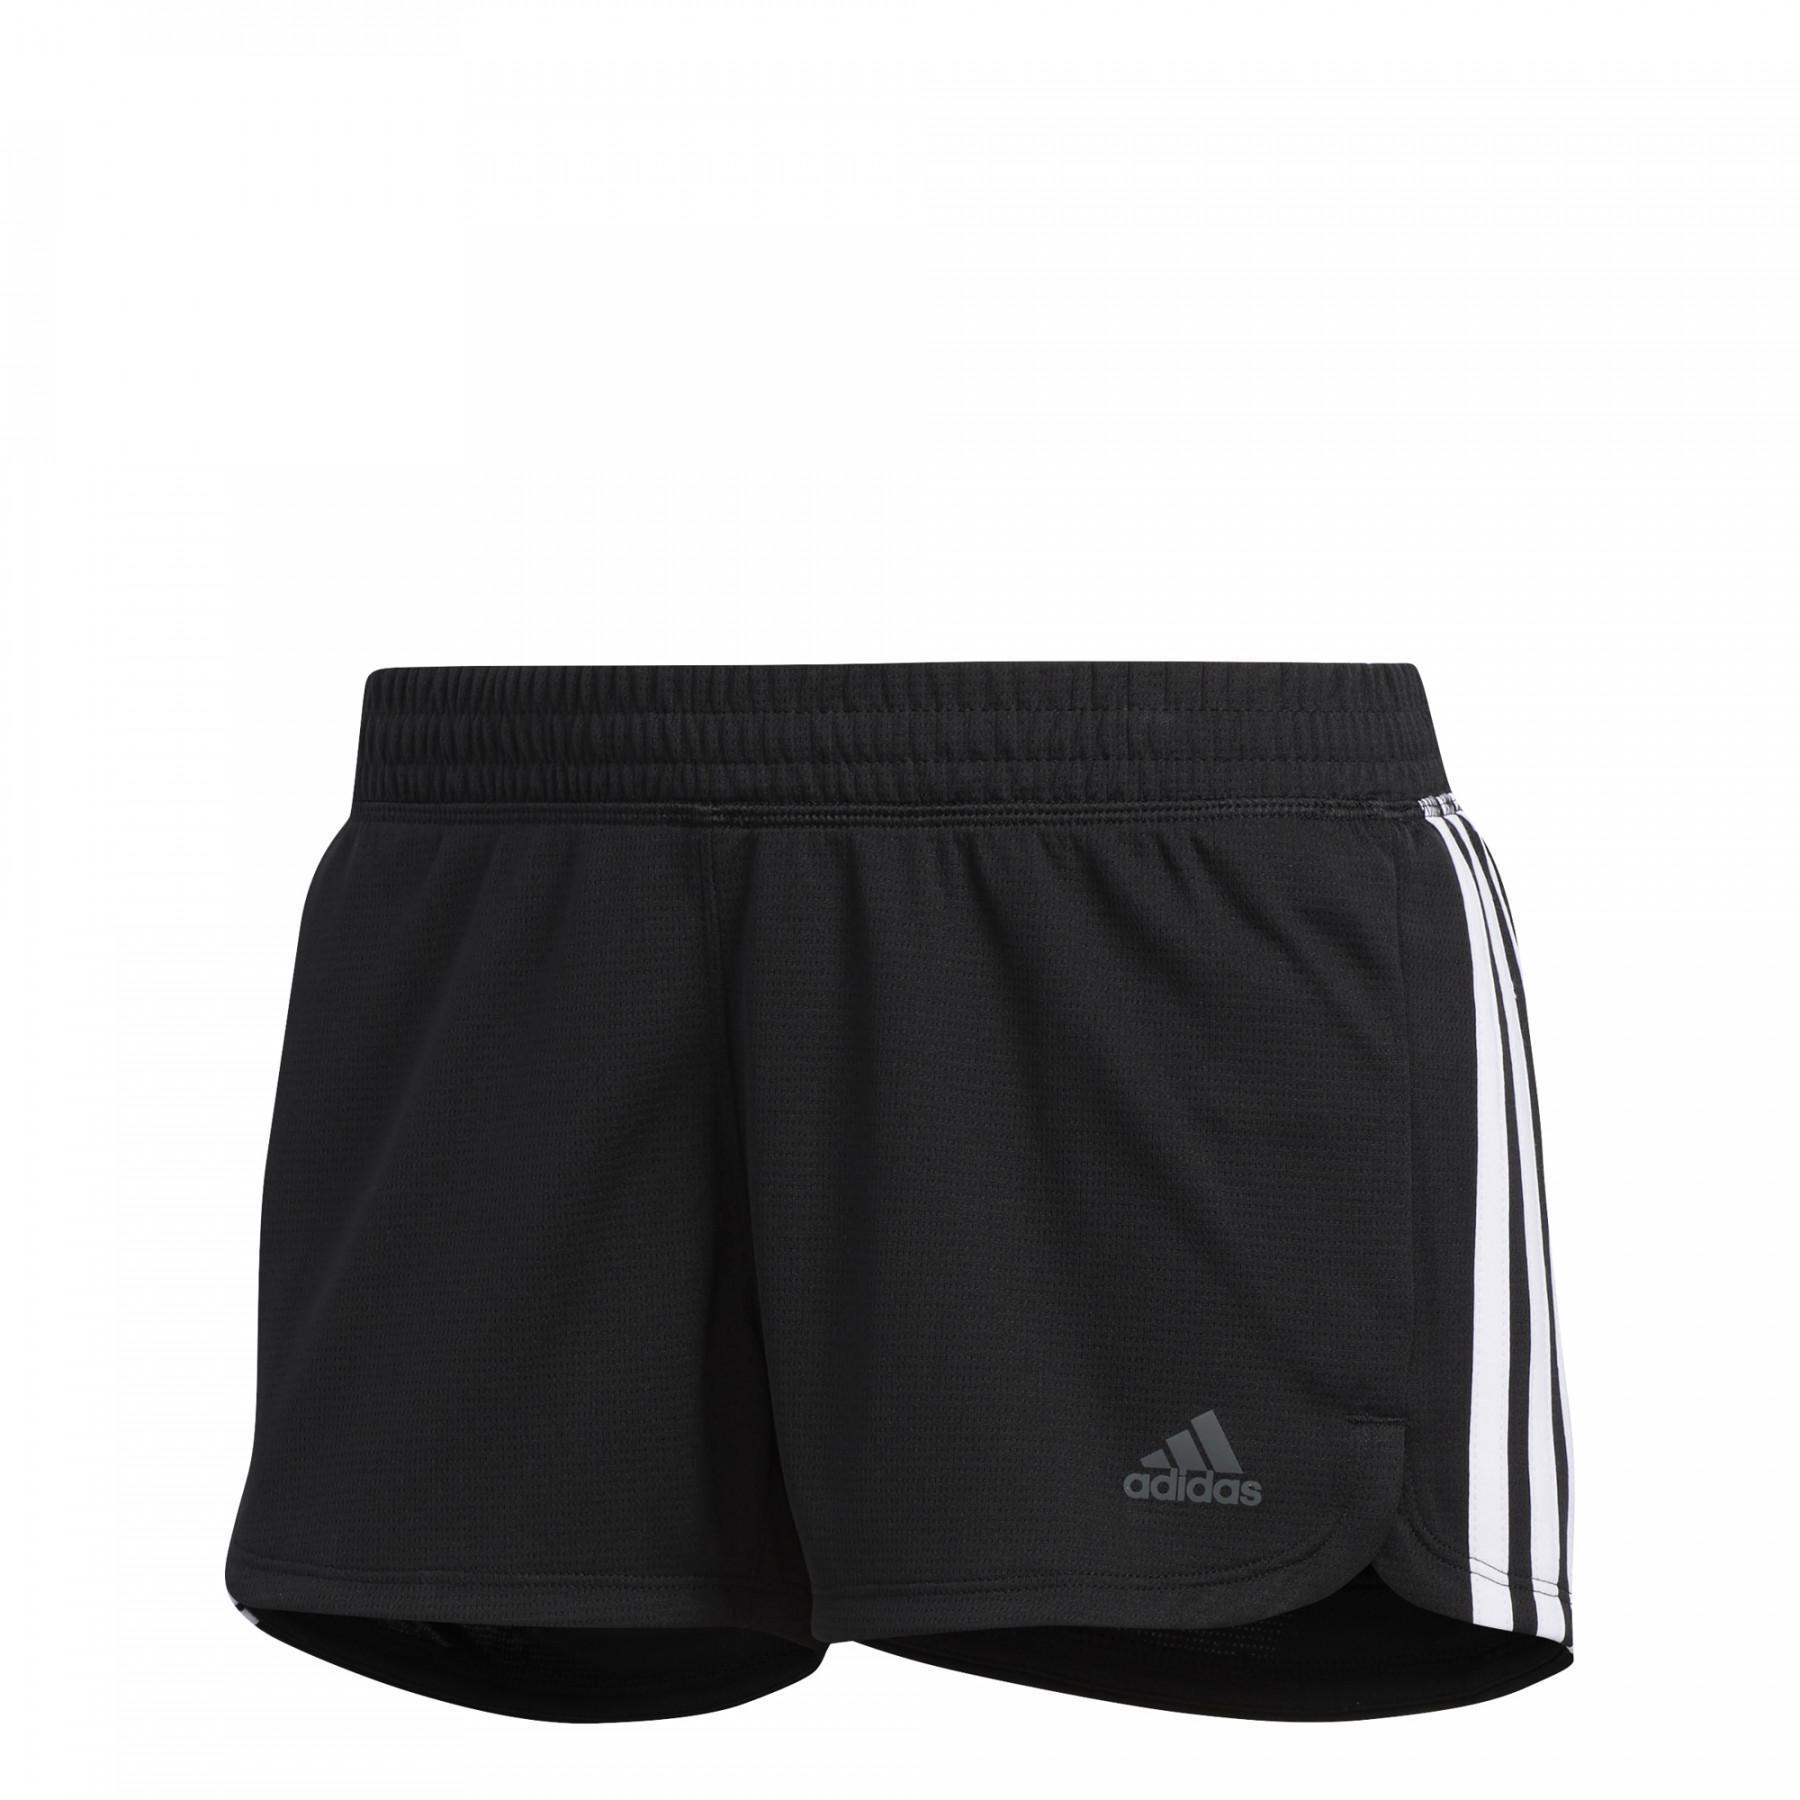 Women's shorts adidas Pacer 3-Stripes Knit